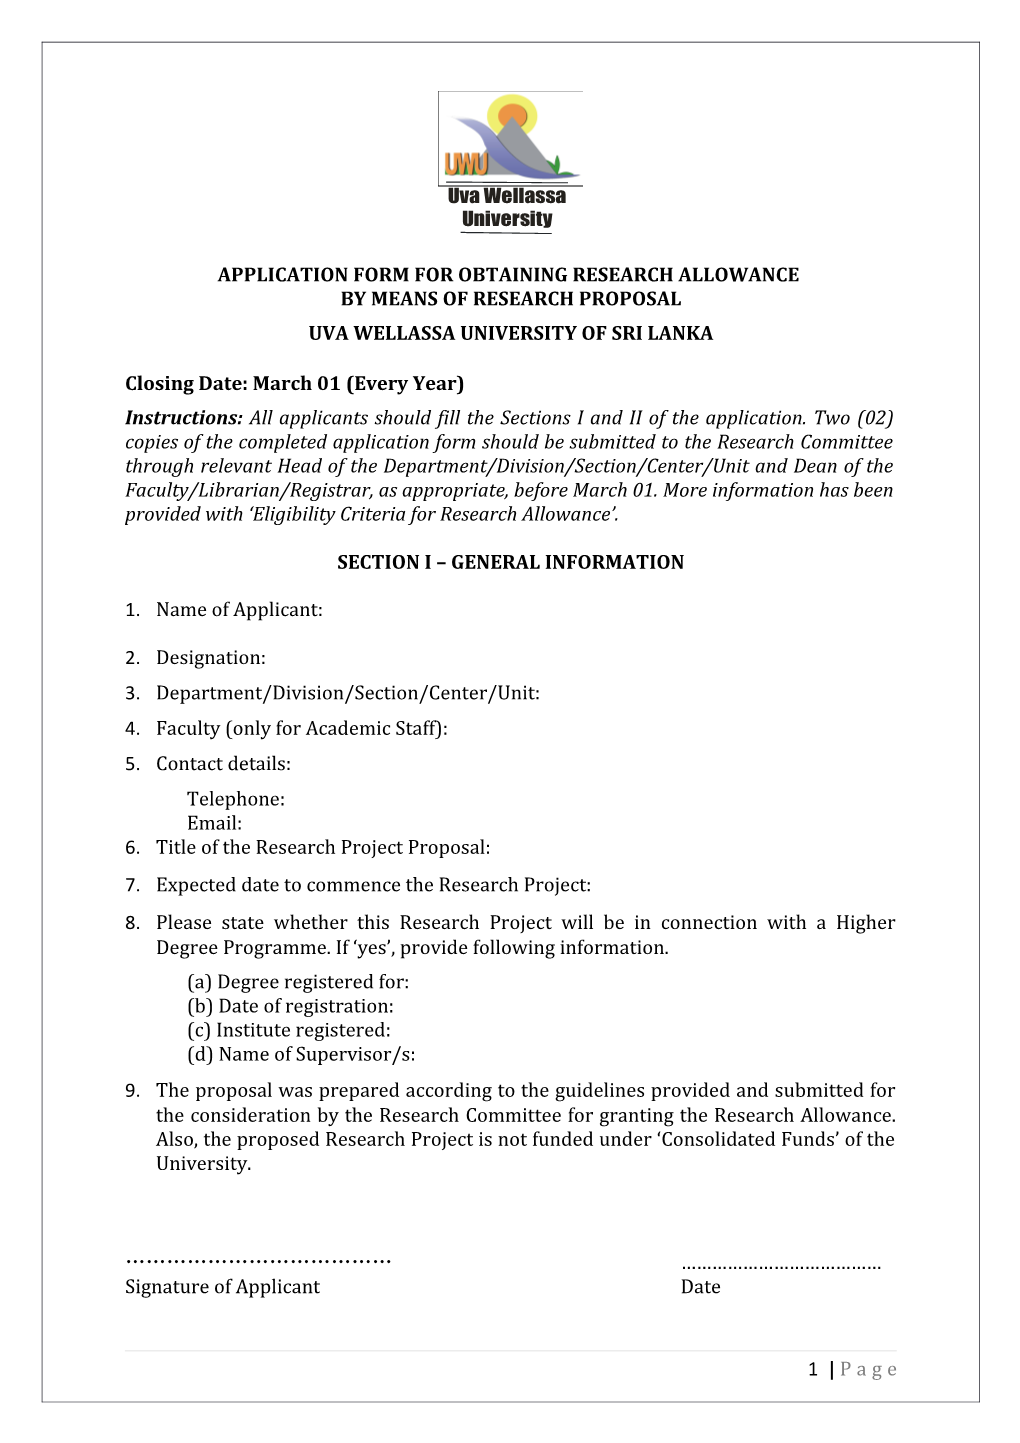 Application Form for Obtaining Research Allowance